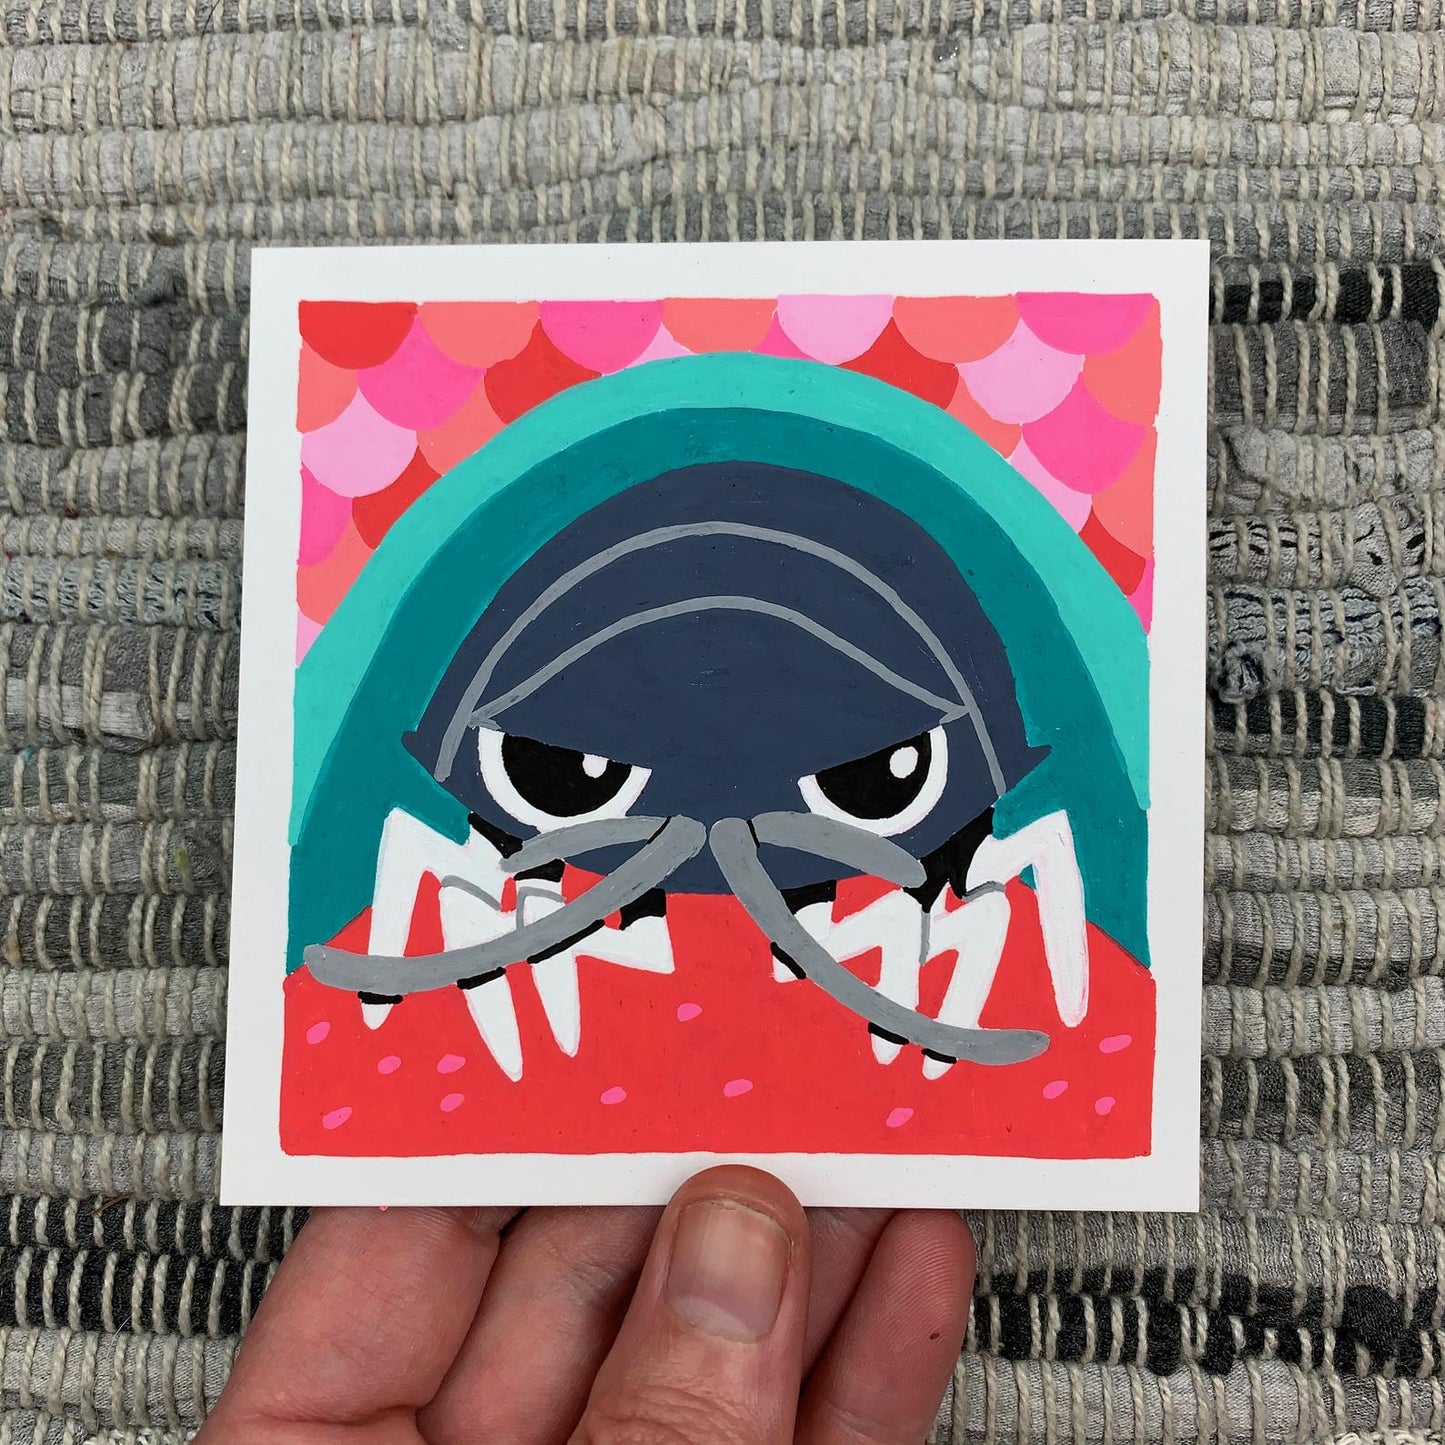 Original artwork of a cute isopd sitting on a fish tongue. Materials used: Uni-Posca paint markers.